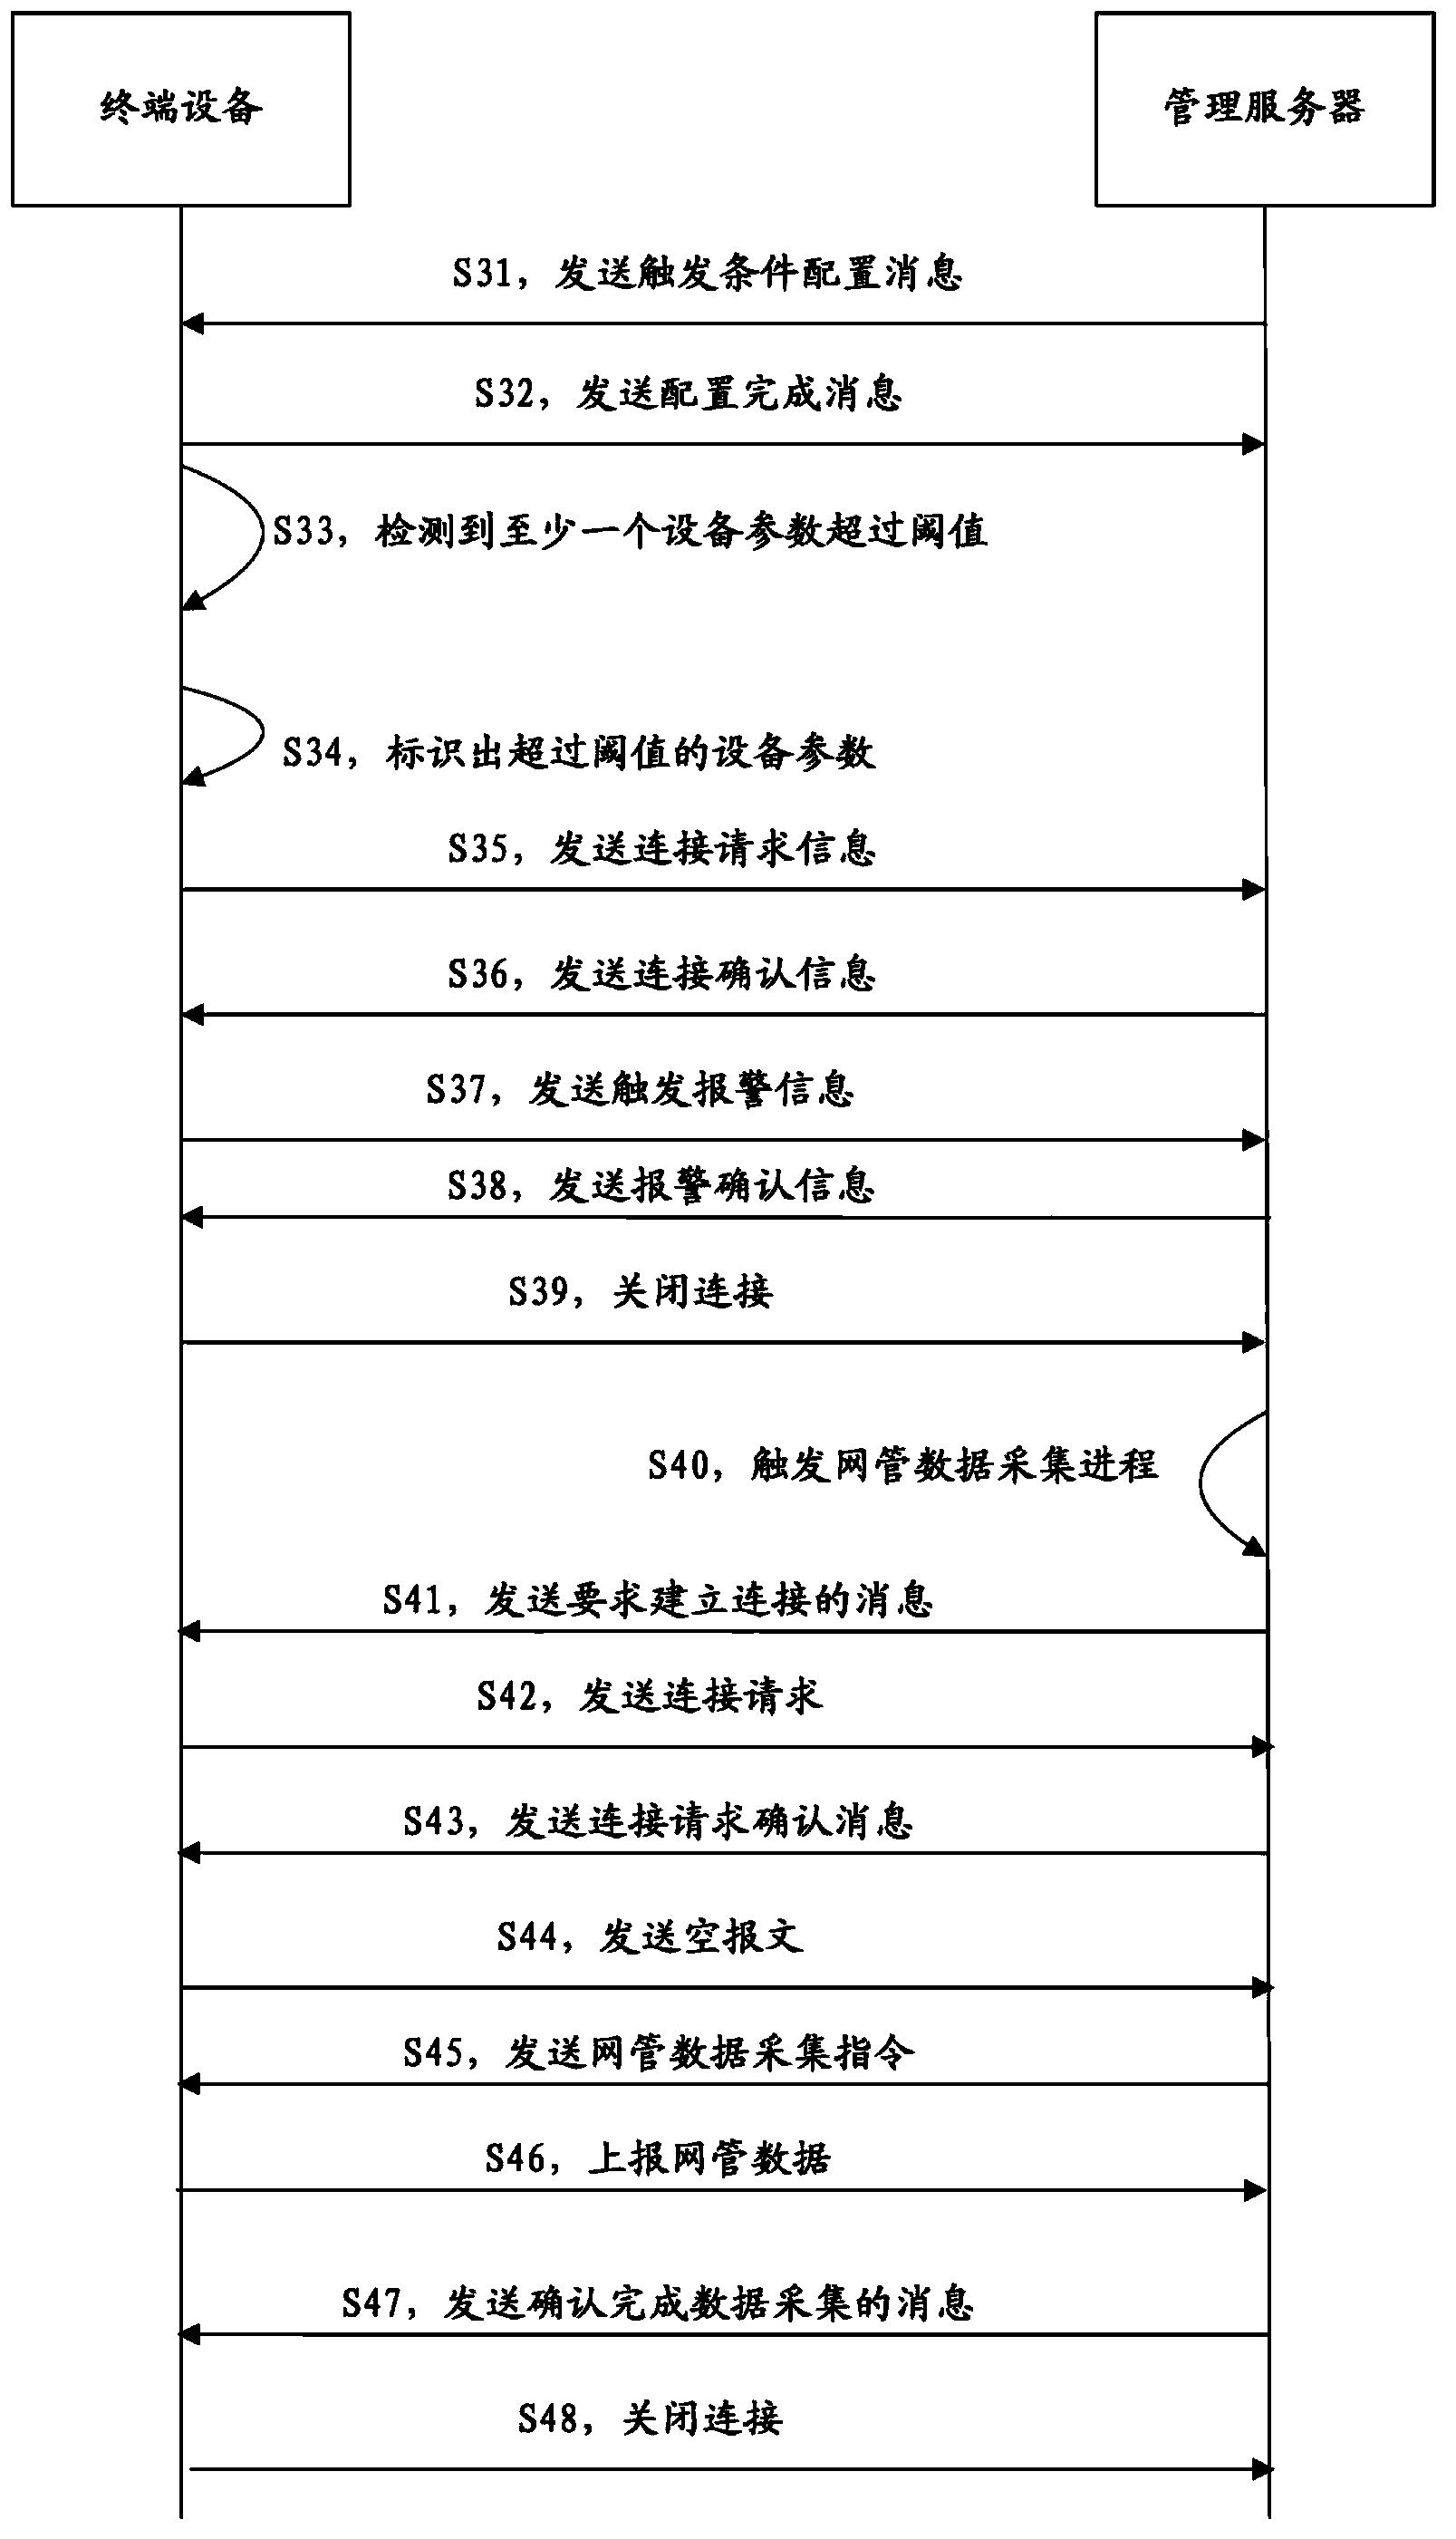 Method and system for network management data acquisition